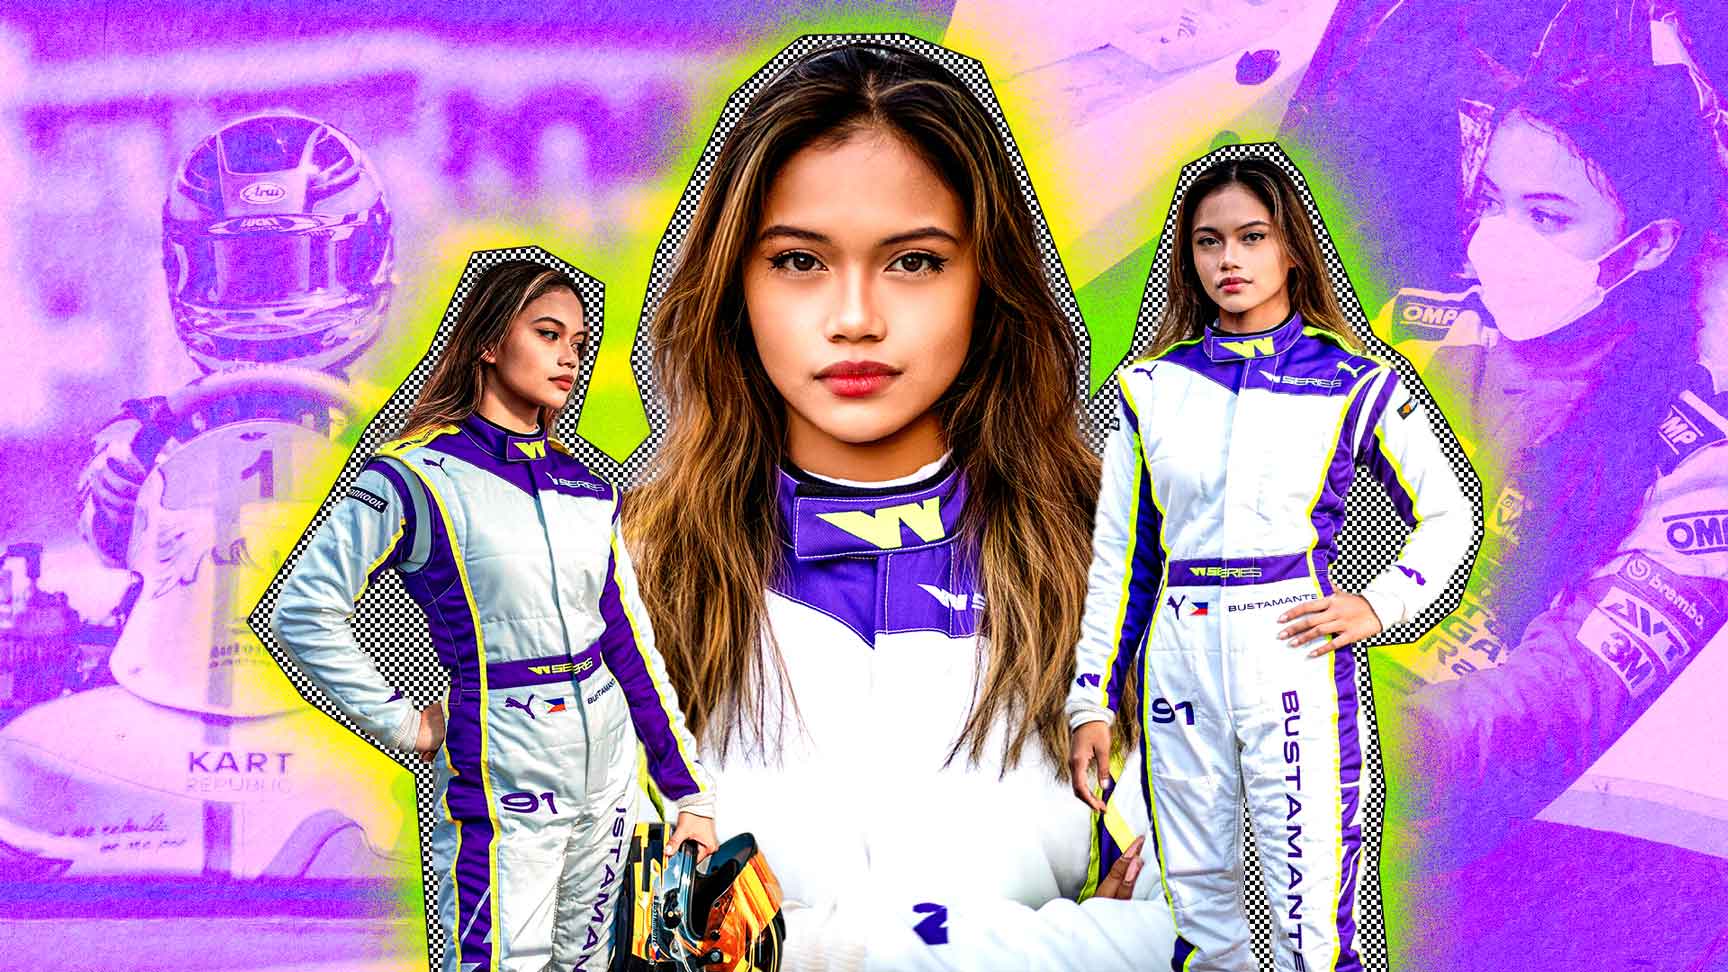 The 17-year-old racer with a super license to thrill